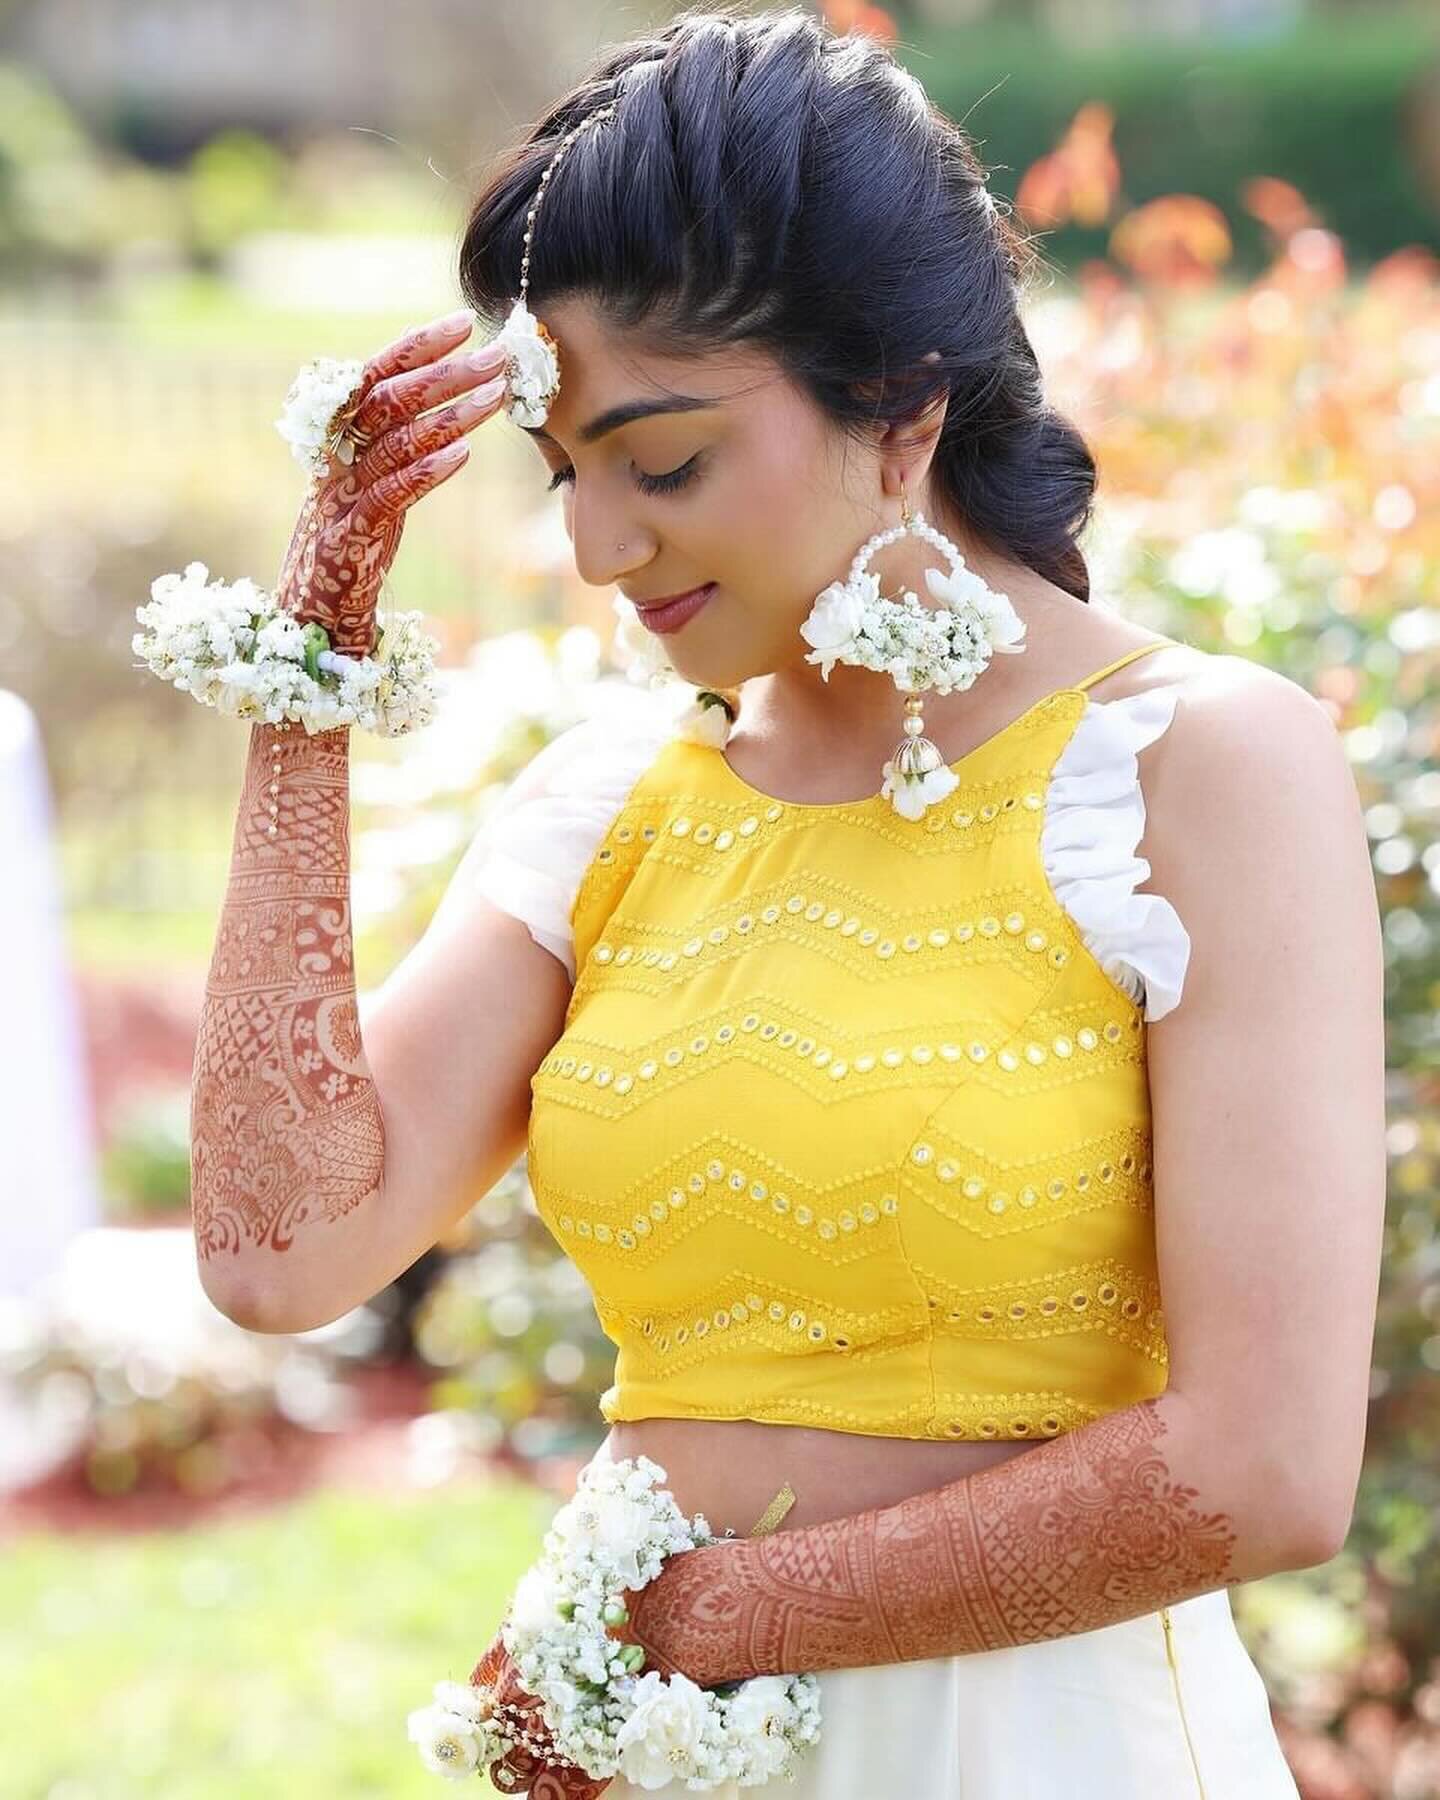 It was such a pleasure working on the florals for this gorgeous bride. @sonalipatidar thank you for having me as a part of your vendor family .

Planner - @crimsonbleuevents 
Decor - @myardecor 
Photography- @shanphotographyinc 
Mua - @atlantamakeupa